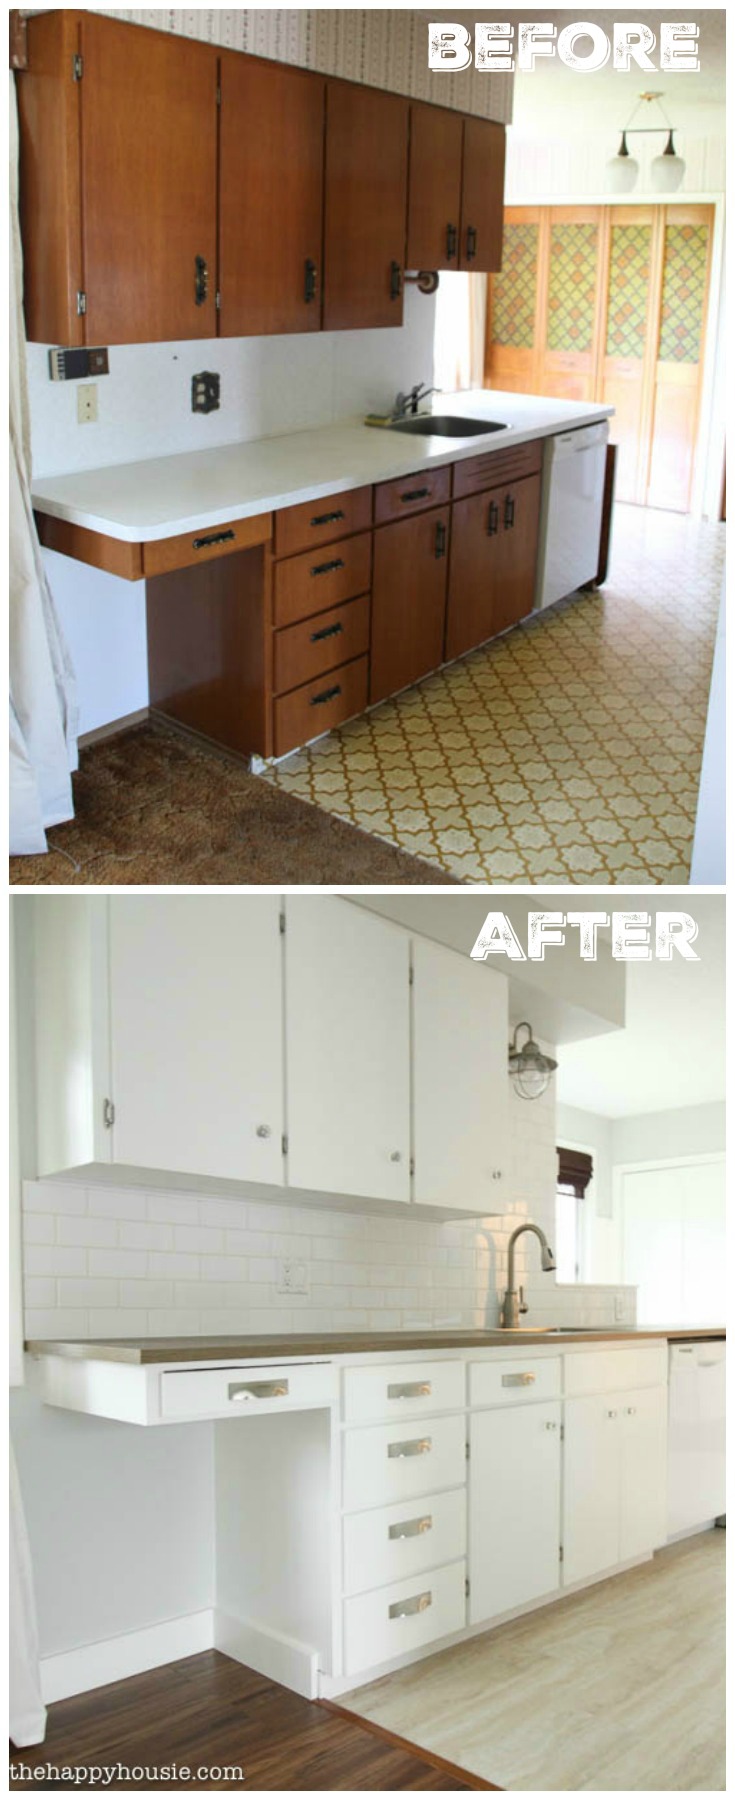 Thrifty Kitchen Makeover on a Budget with Benjamin Moore Simply White Kitchen Cabinets D Lawless Hardware and Moen Faucet at thehappyhousie.com